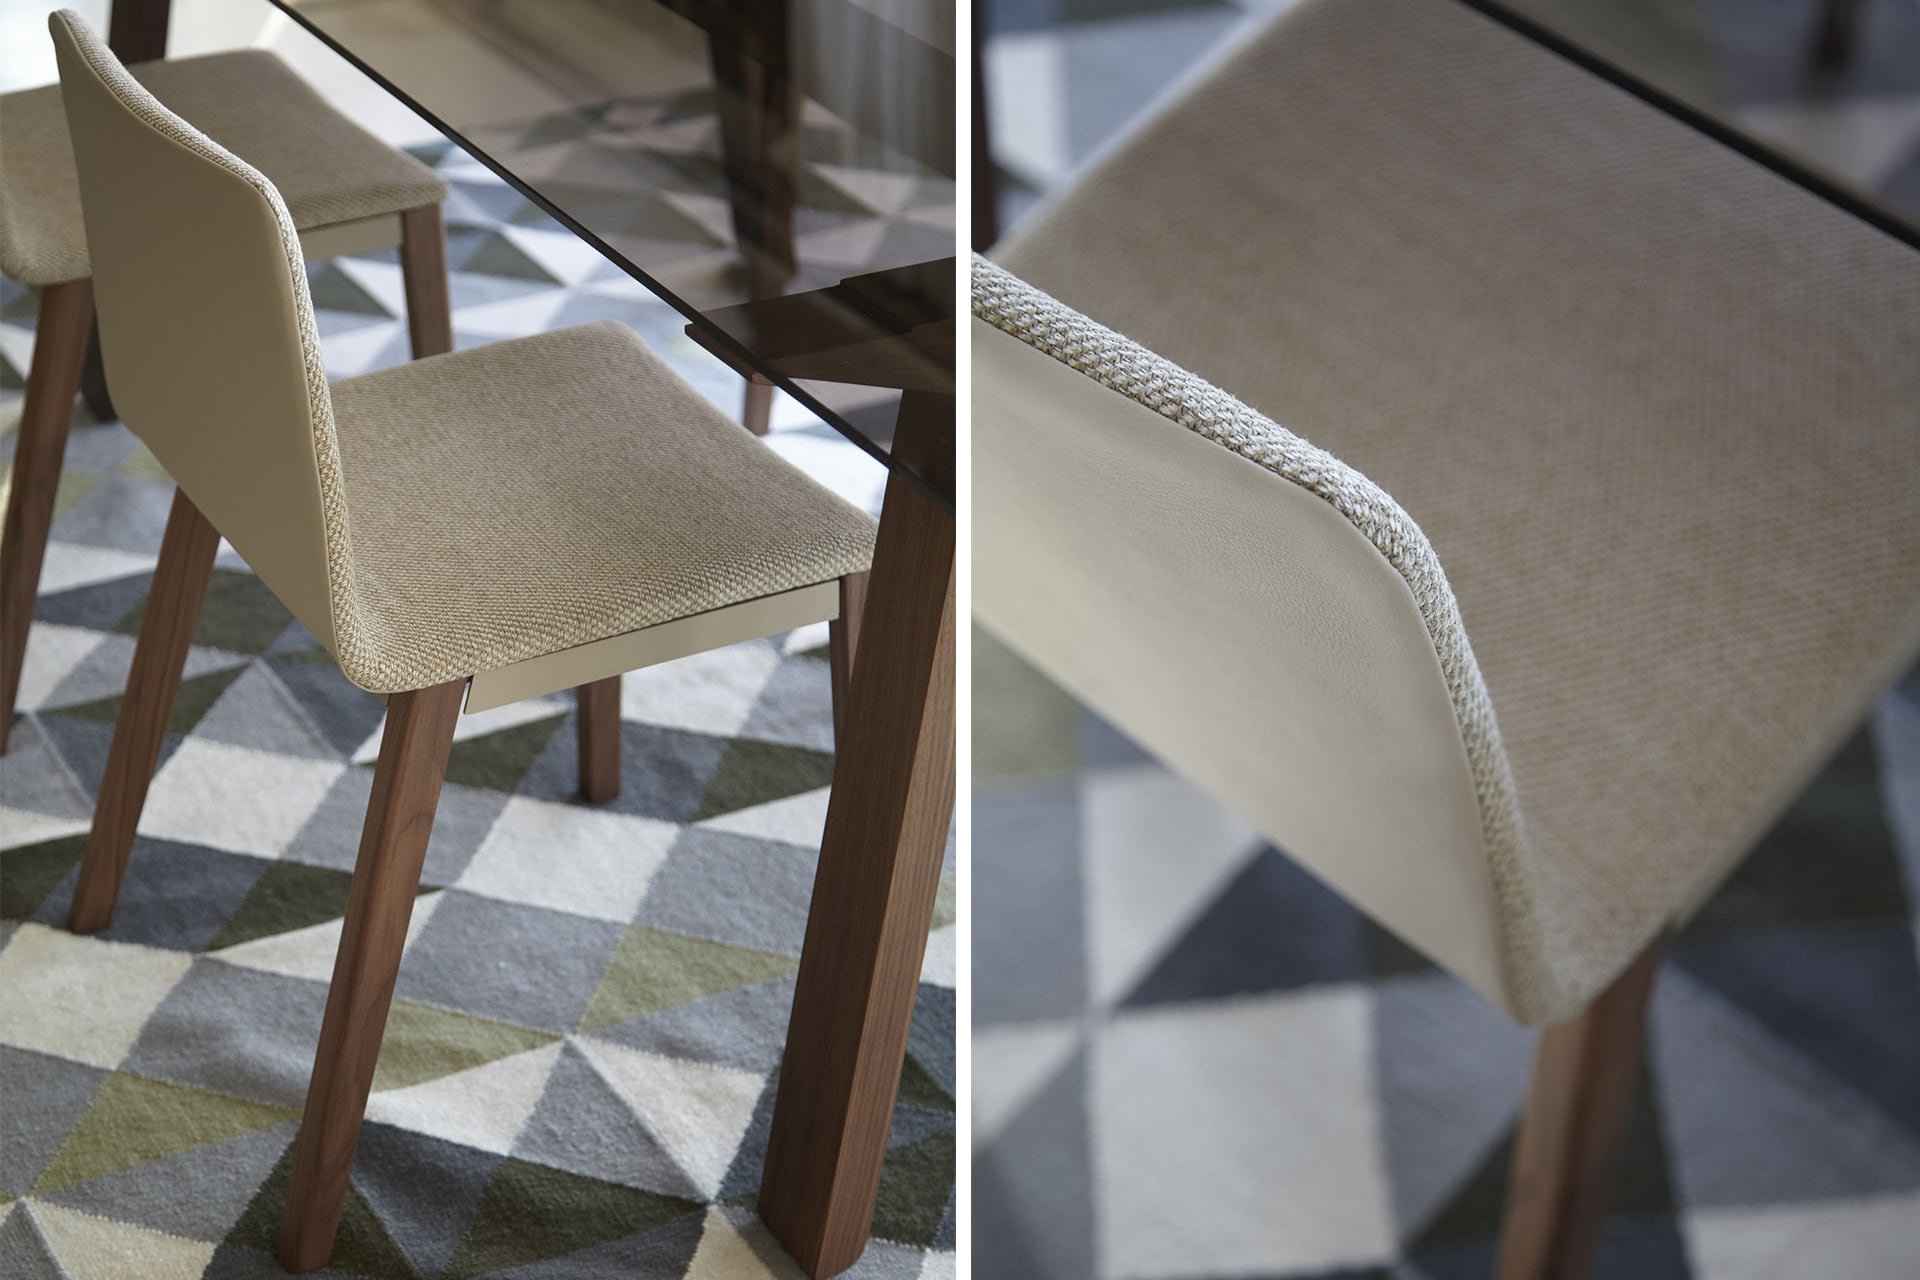 Tyris Dining Chair from Punt Mobles, designed by Odosdesign